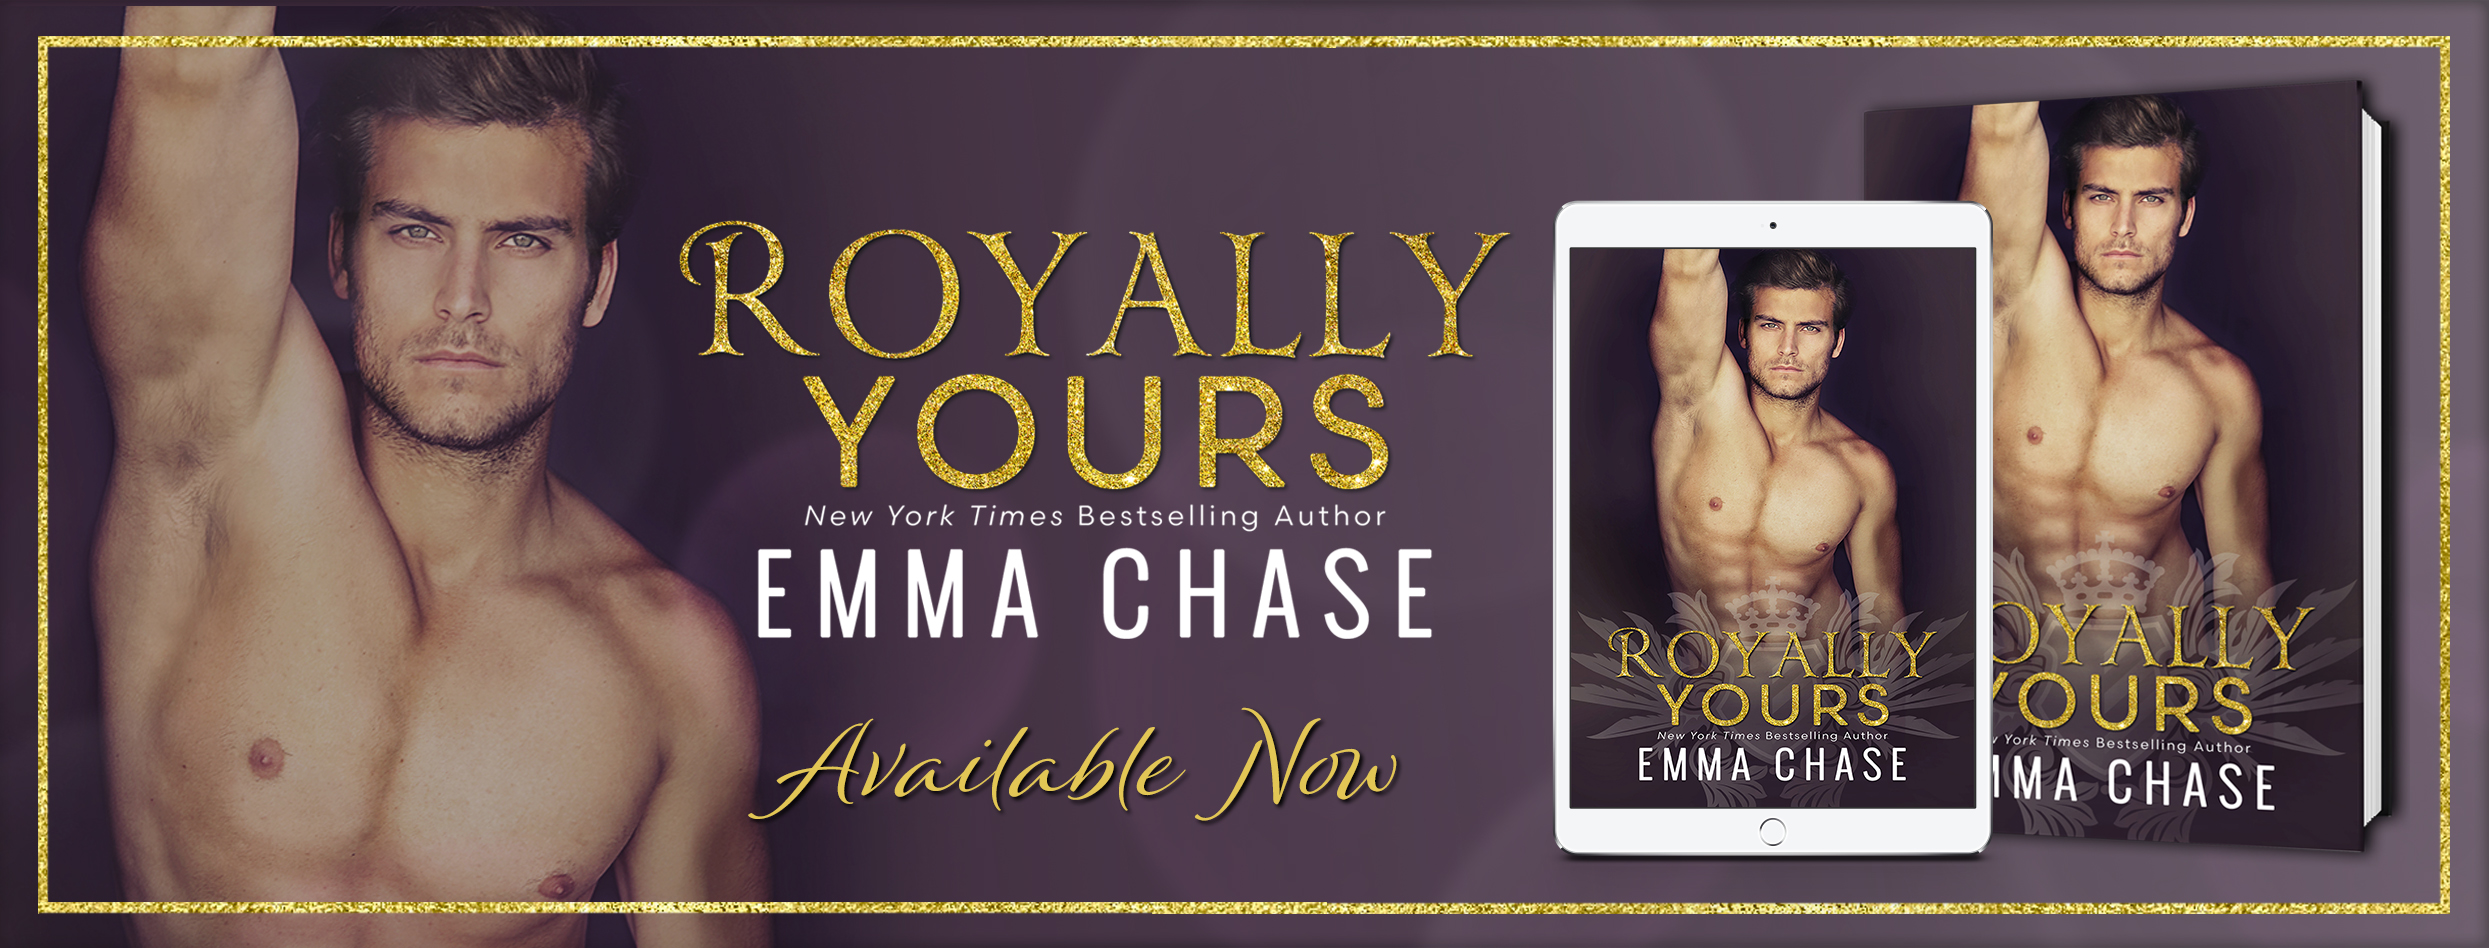 Review: Royally Yours by Emma Chase